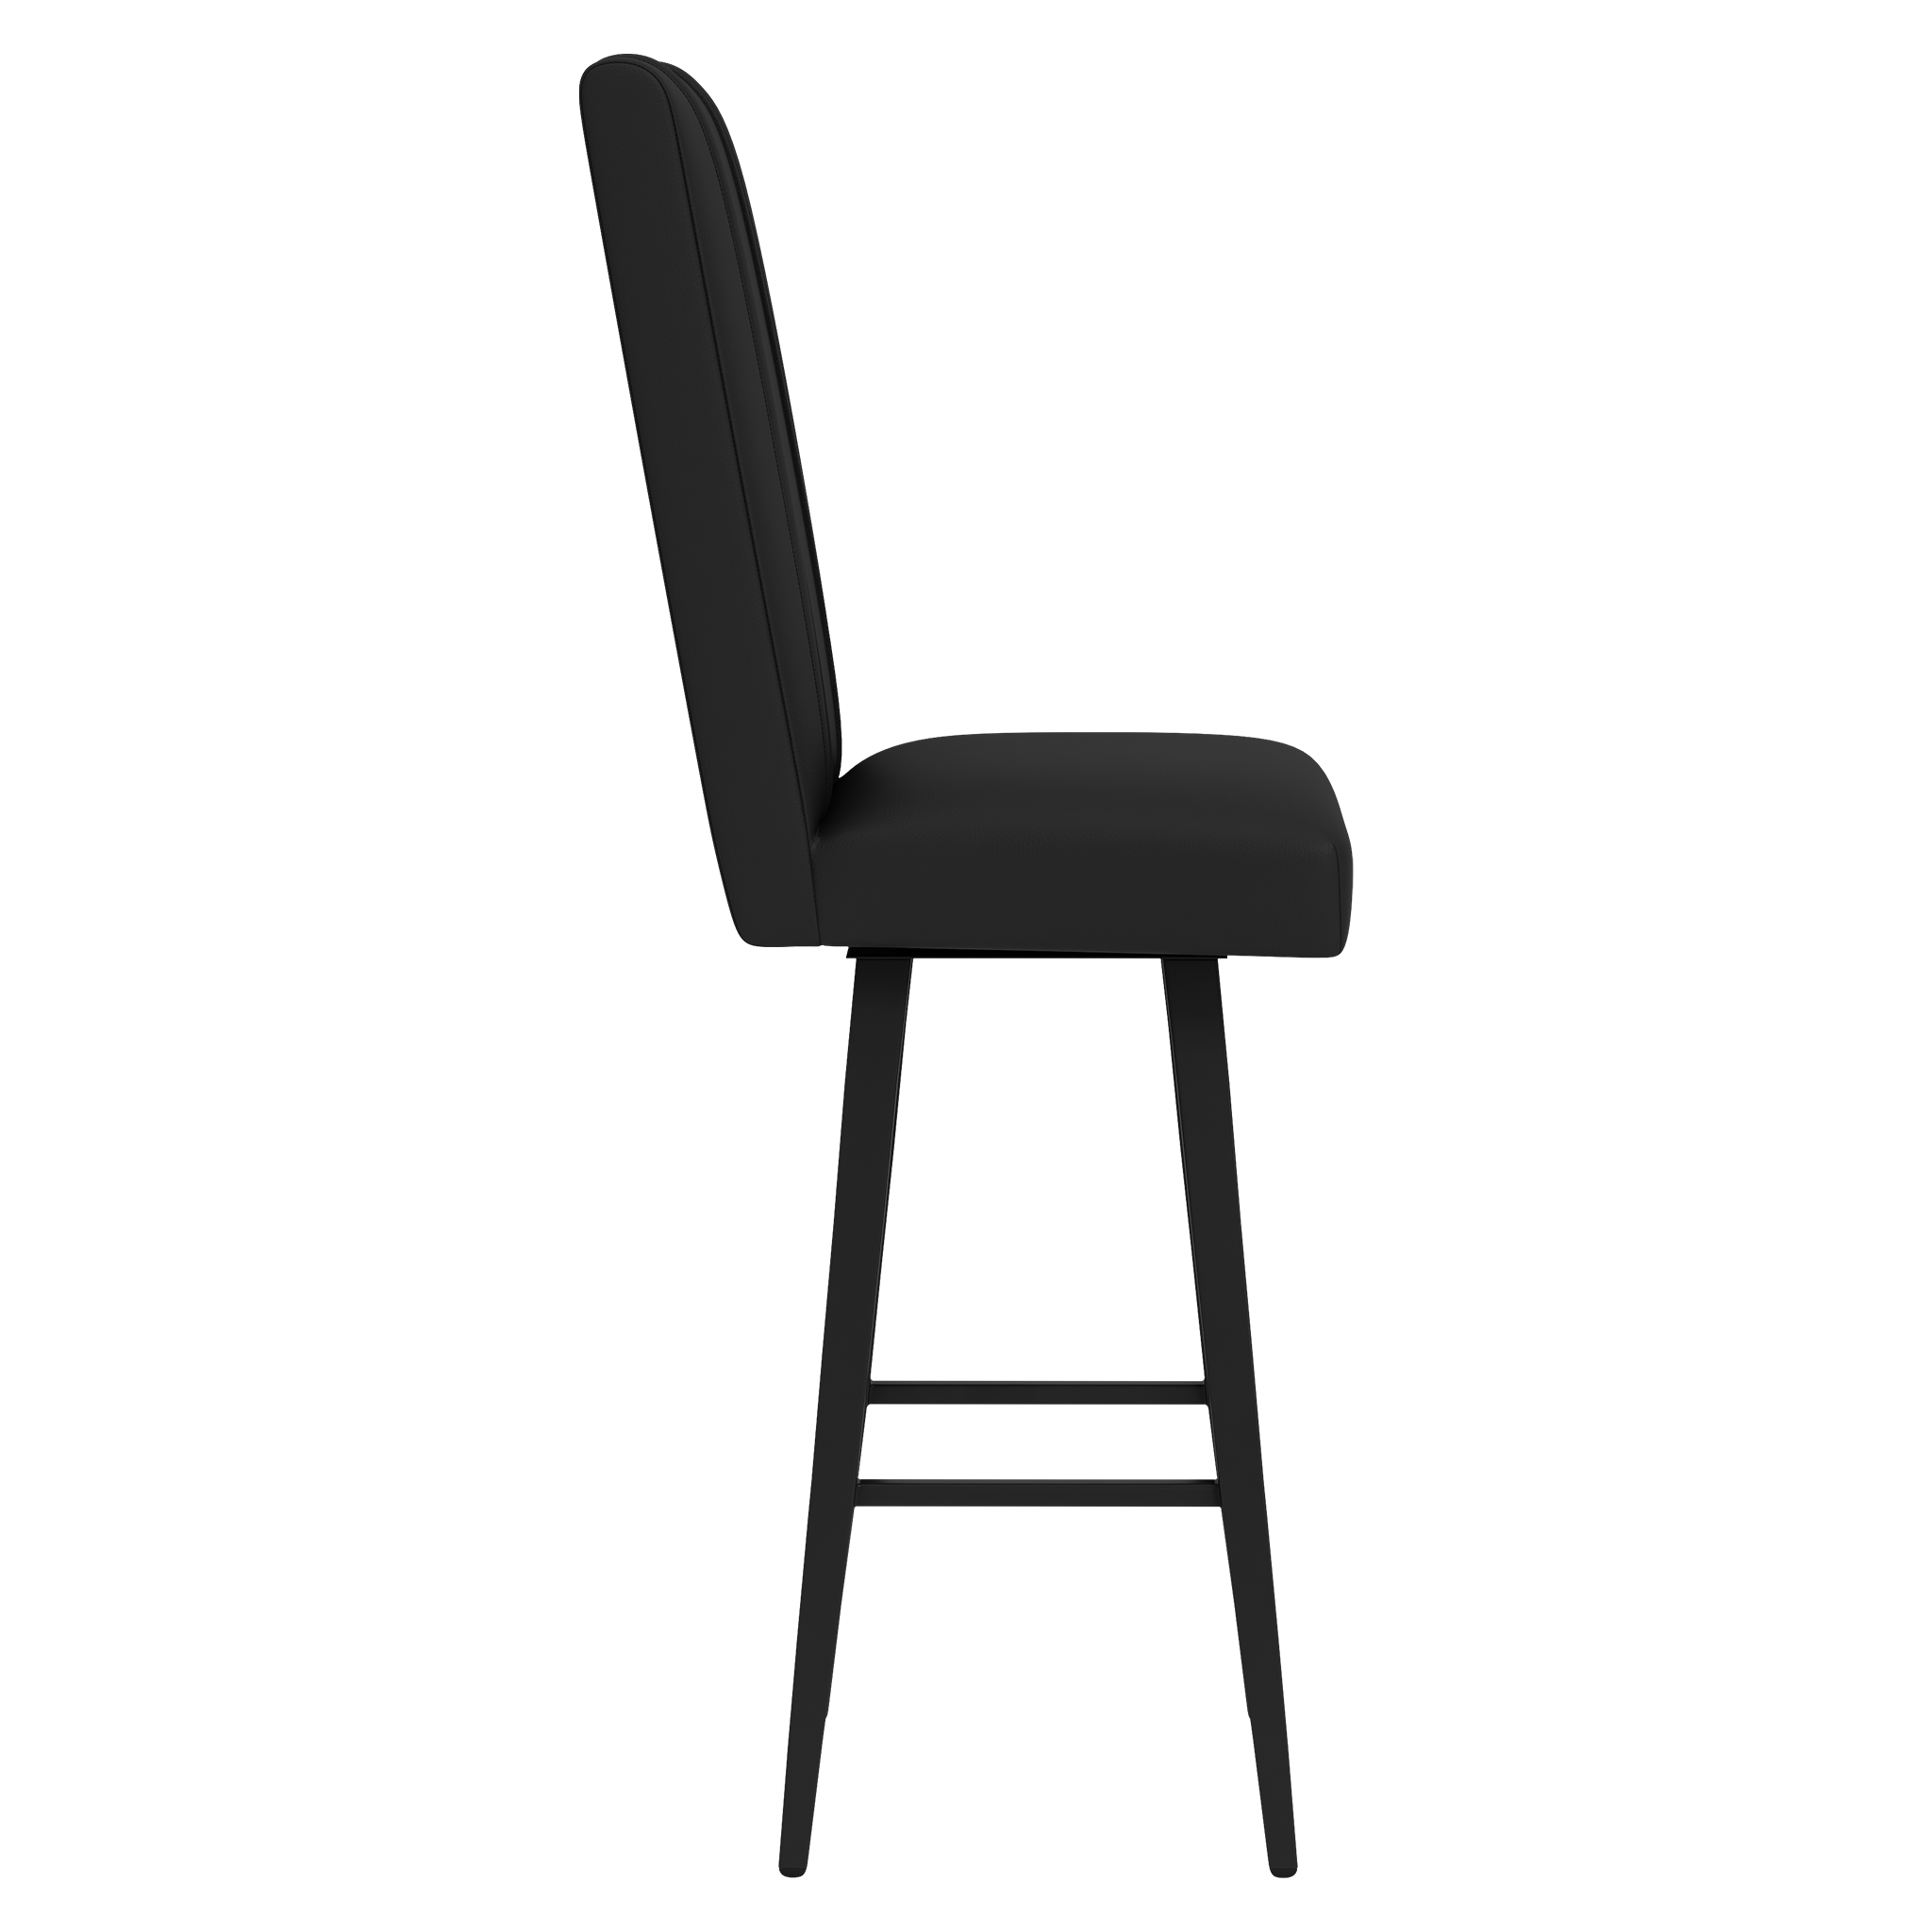 Swivel Bar Stool 2000 with Toronto Blue Jays Cooperstown